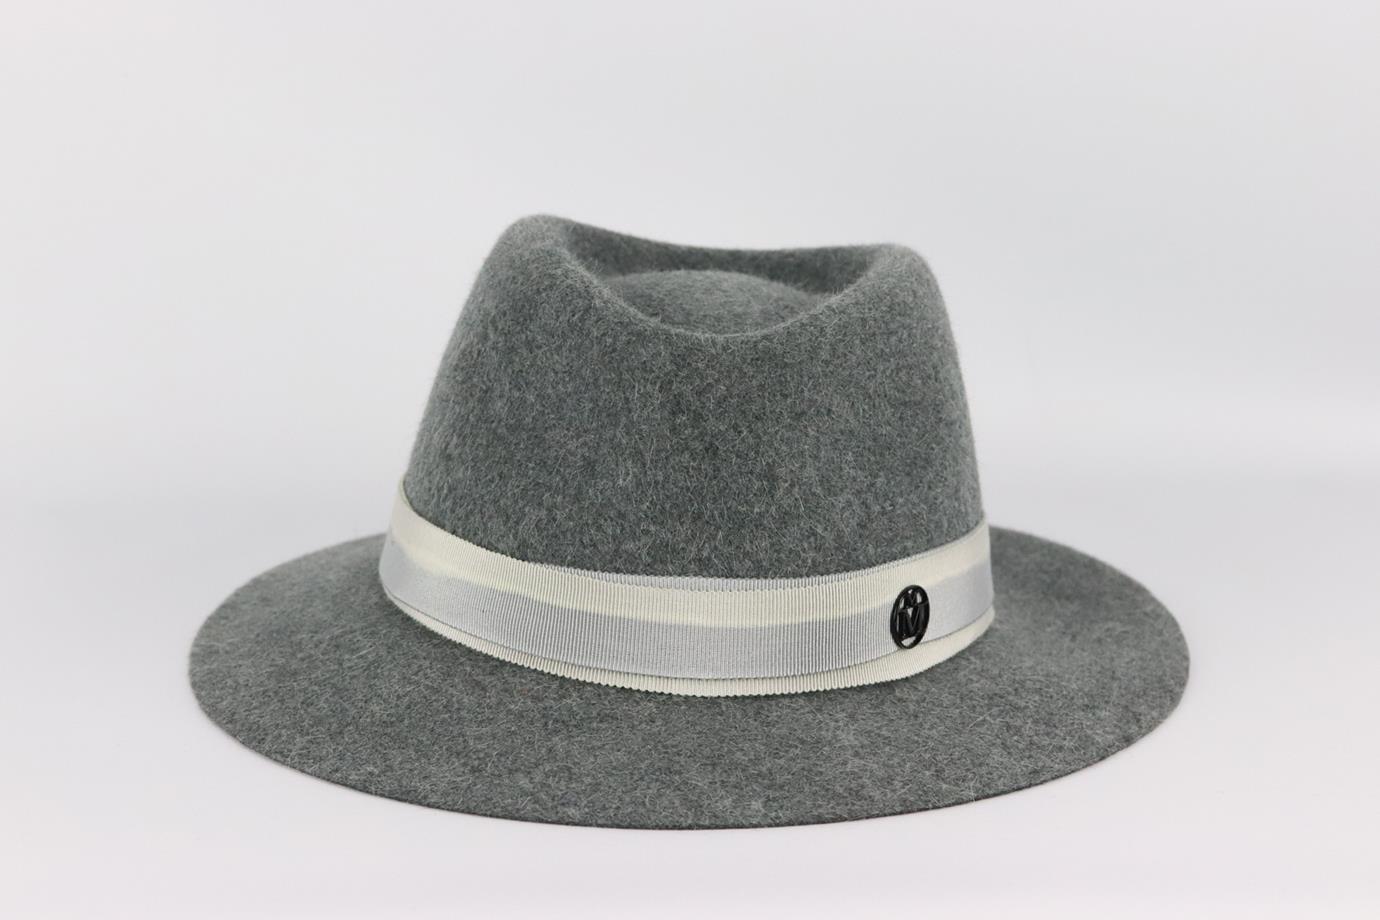 Maison Michel grosgrain trimmed wool felt fedora. Grey and black. Pull on. 100% Wool; trim: 56% cotton, 44% viscose. Does not come with dustbag or box. Size: Medium. Circumference: 23.6 in. Brim Width: 2.25 in. Very good condition - No sign of wear;